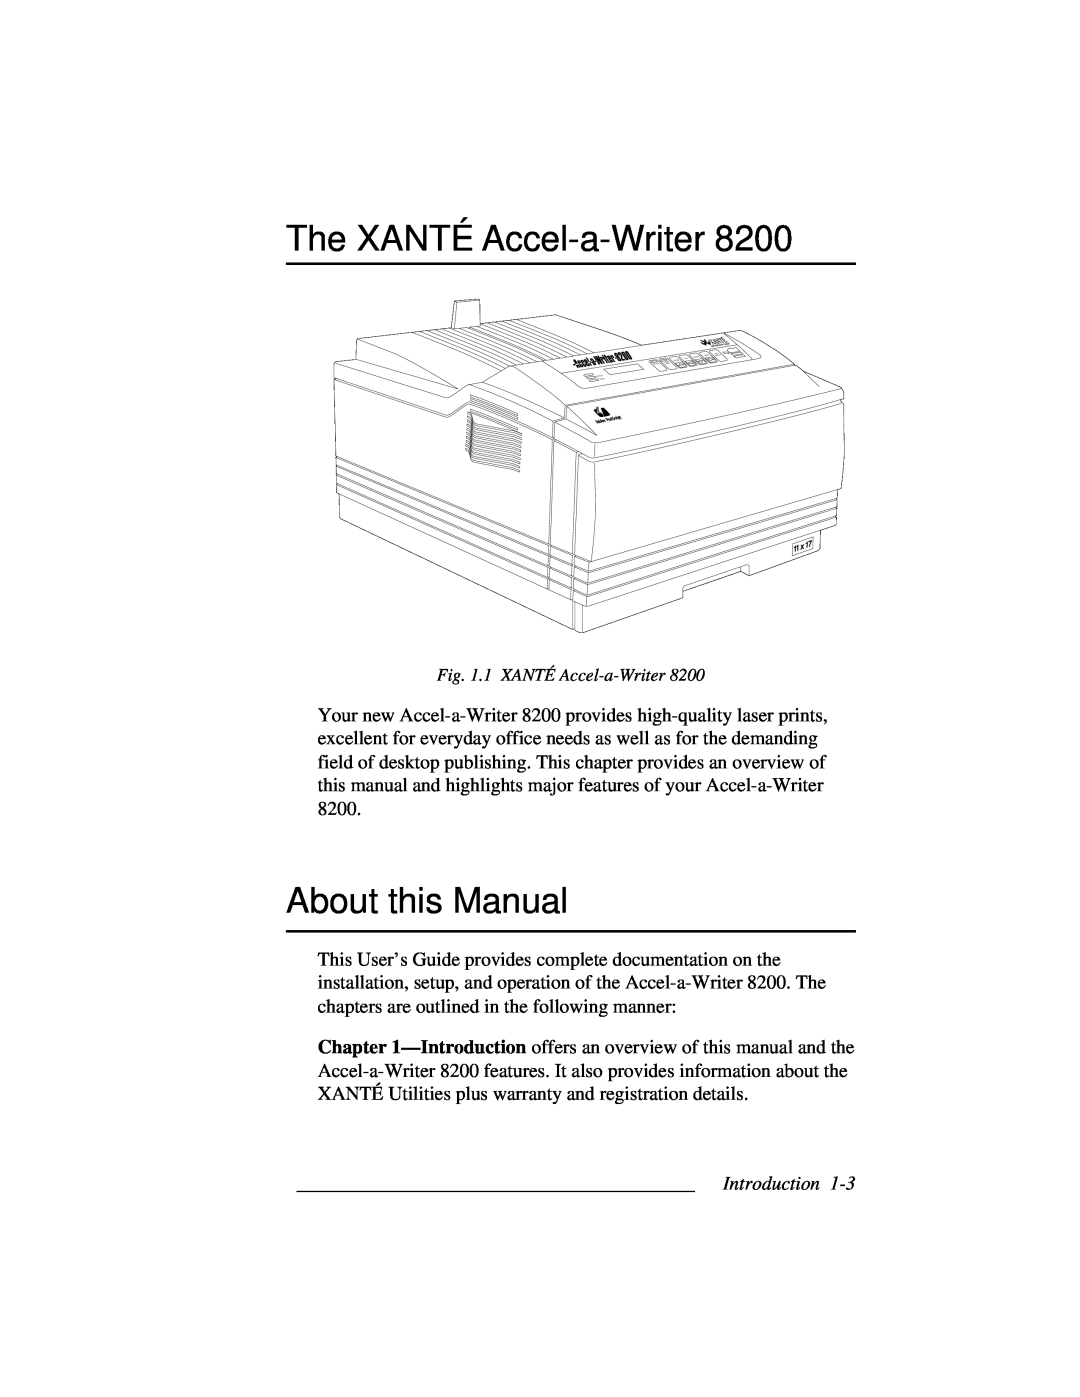 Accel 8200 manual The XANTÉ Accel-a-Writer, About this Manual, 1 XANTÉ Accel-a-Writer 